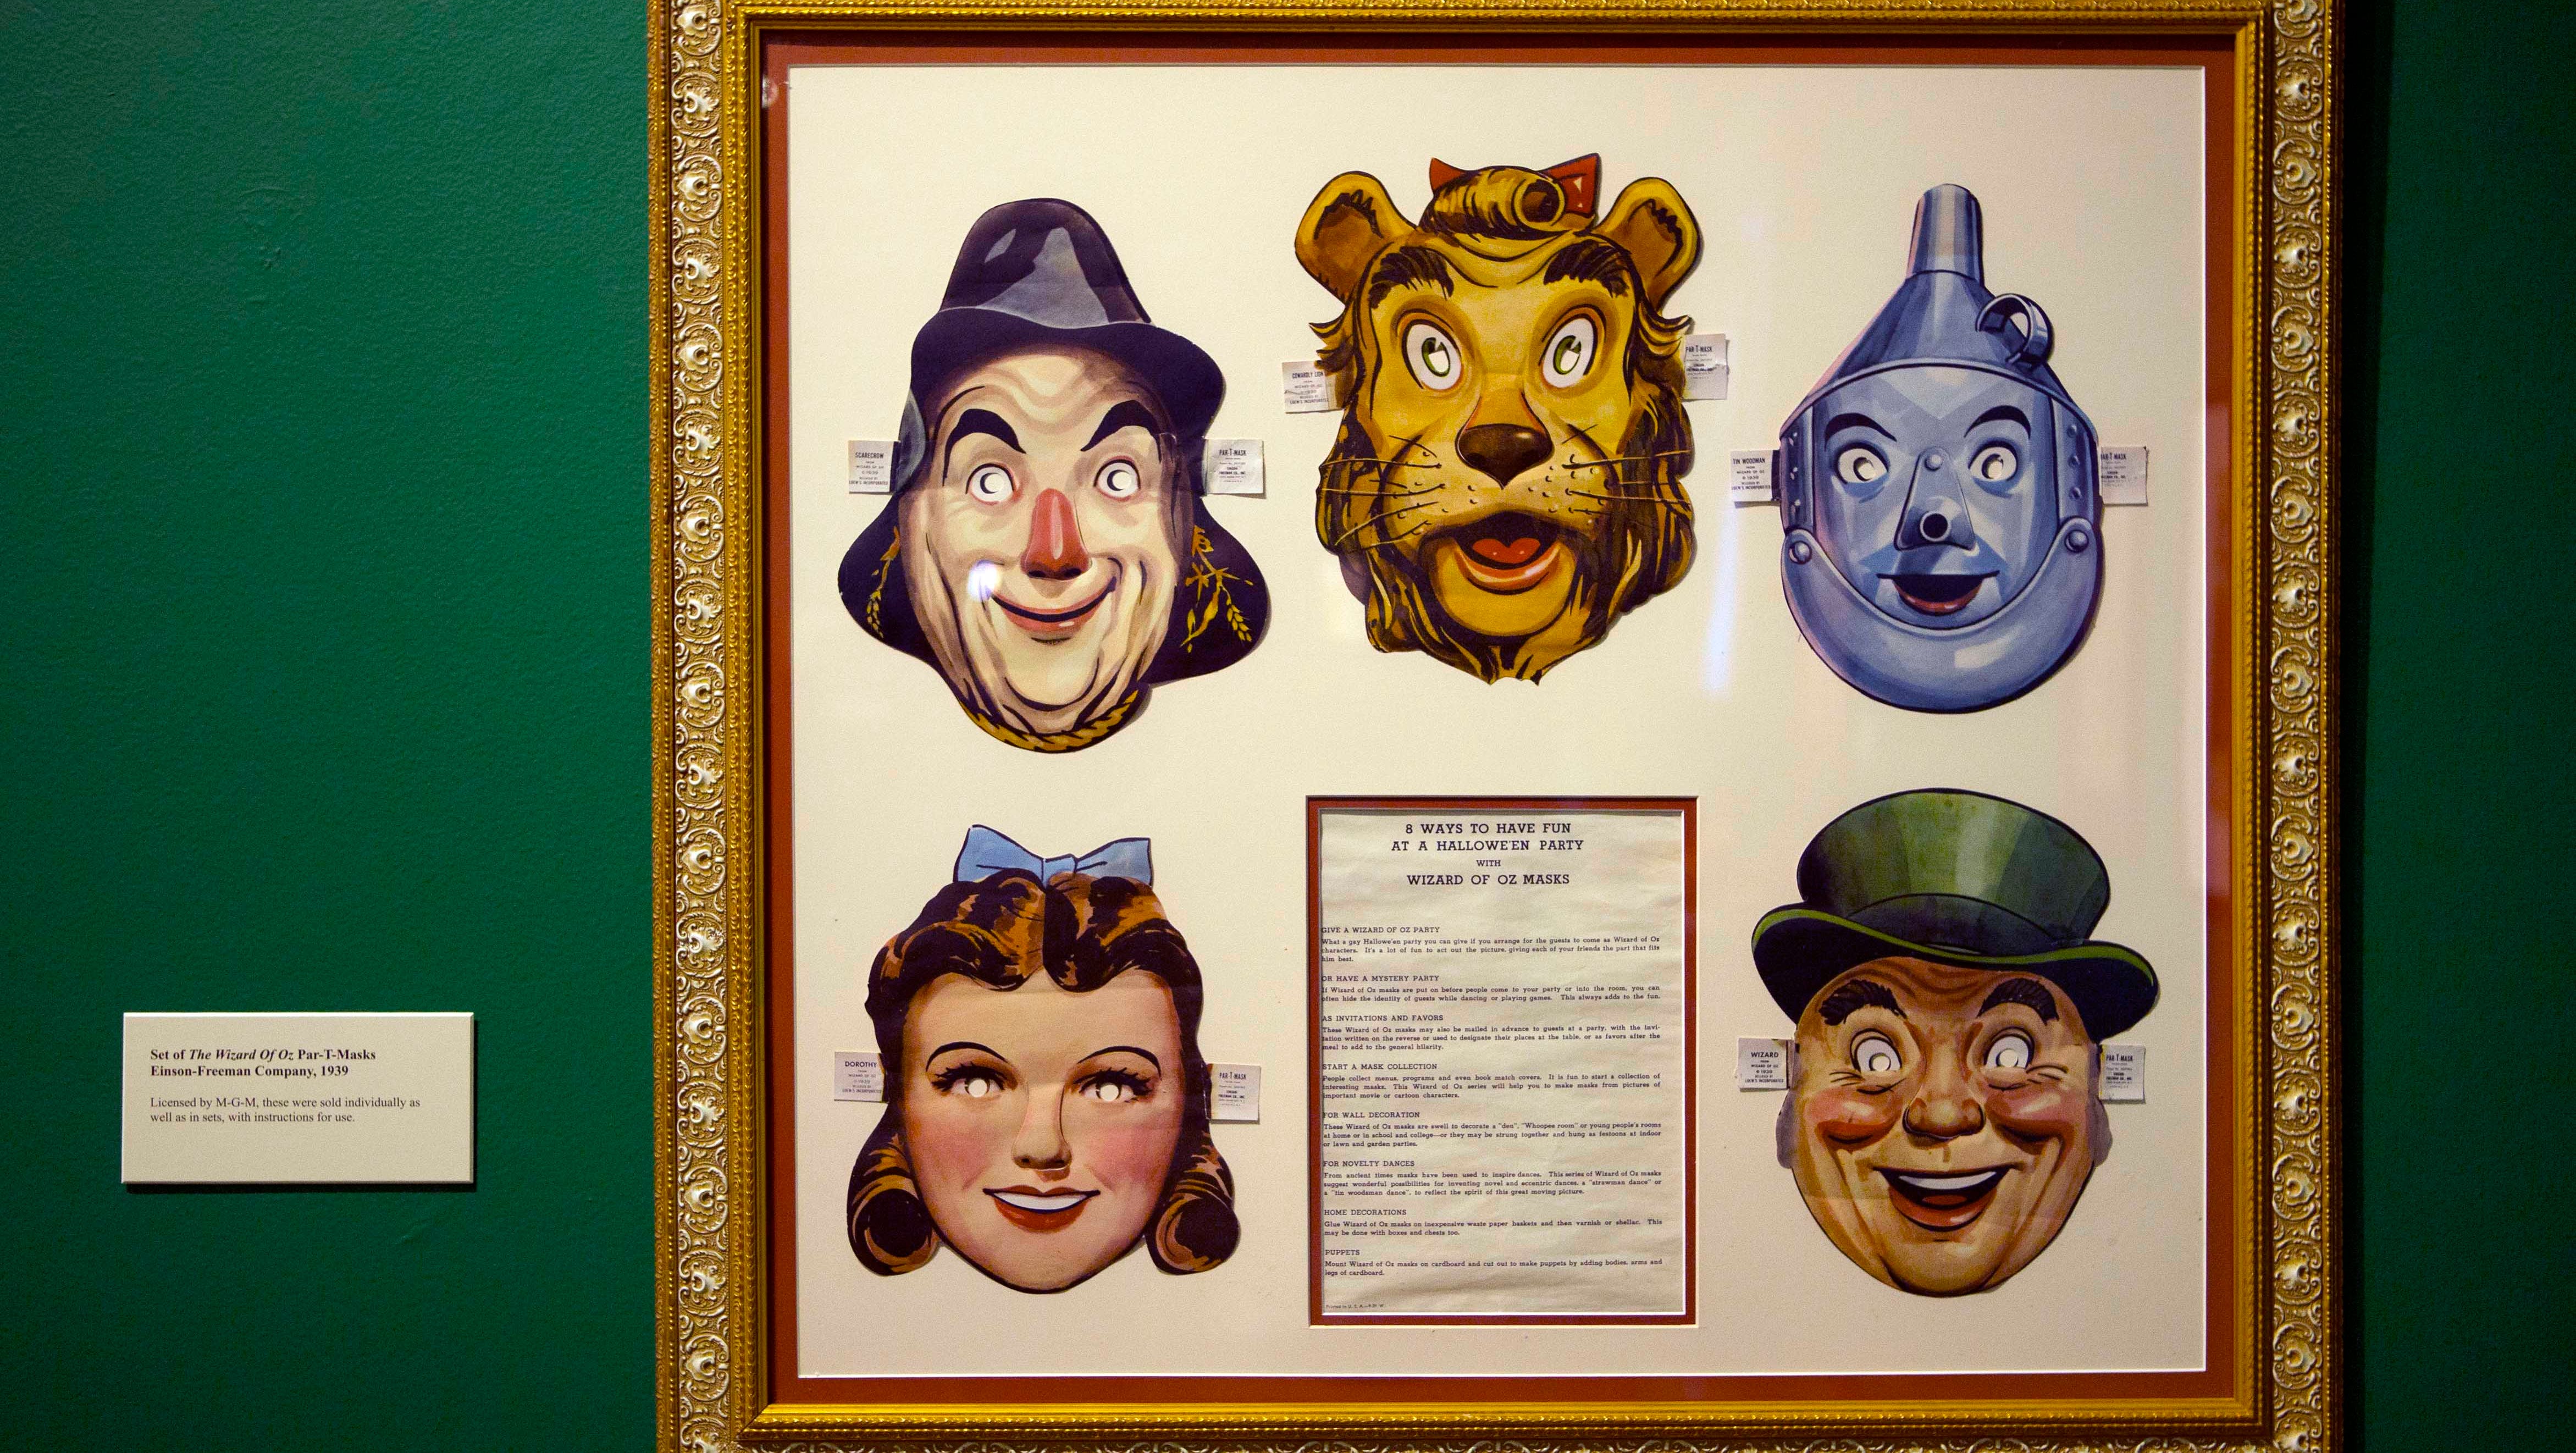 World's 'Wizard of Oz' goes on display